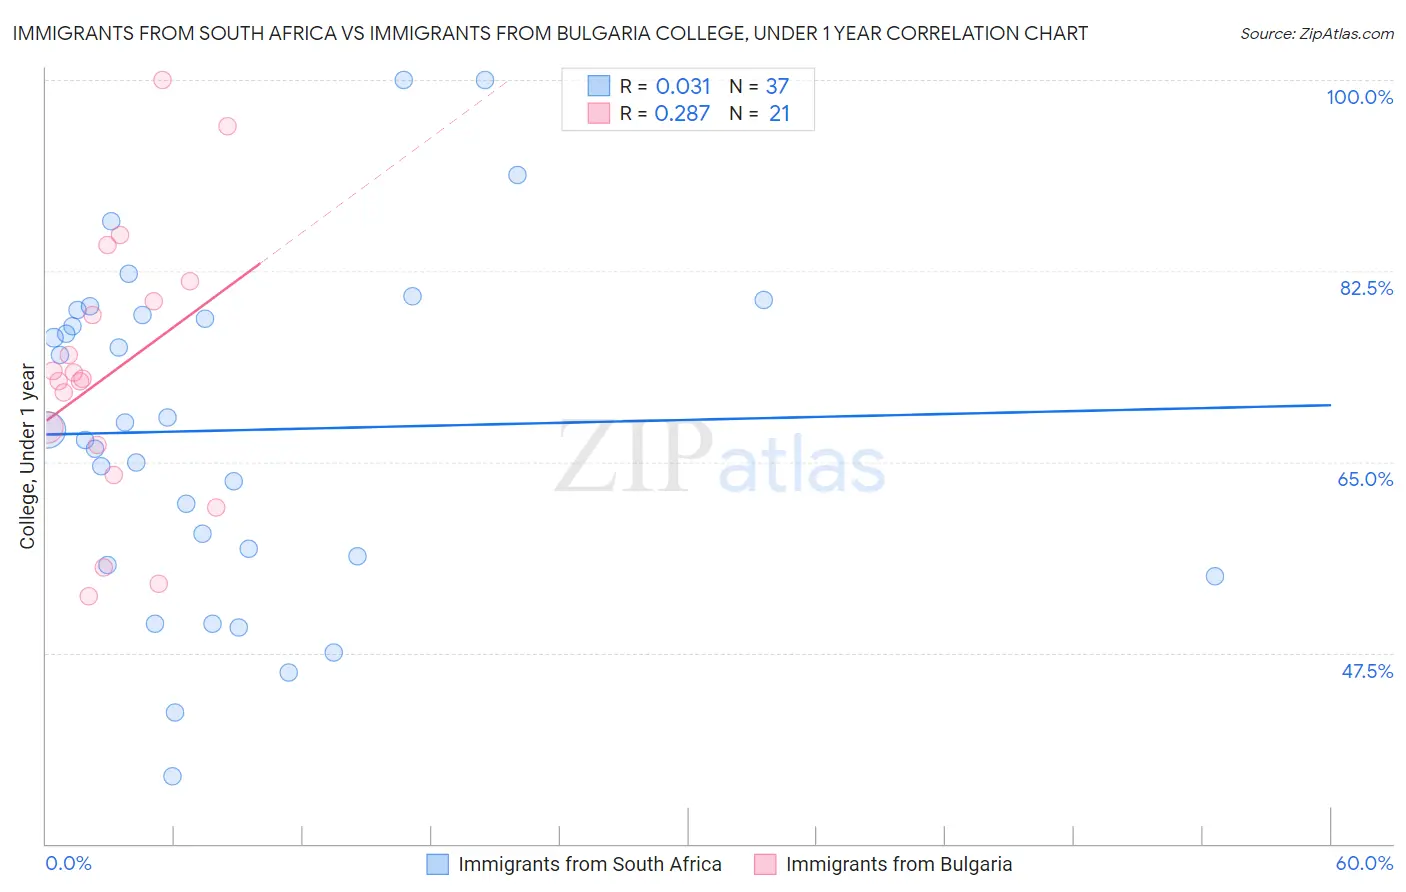 Immigrants from South Africa vs Immigrants from Bulgaria College, Under 1 year